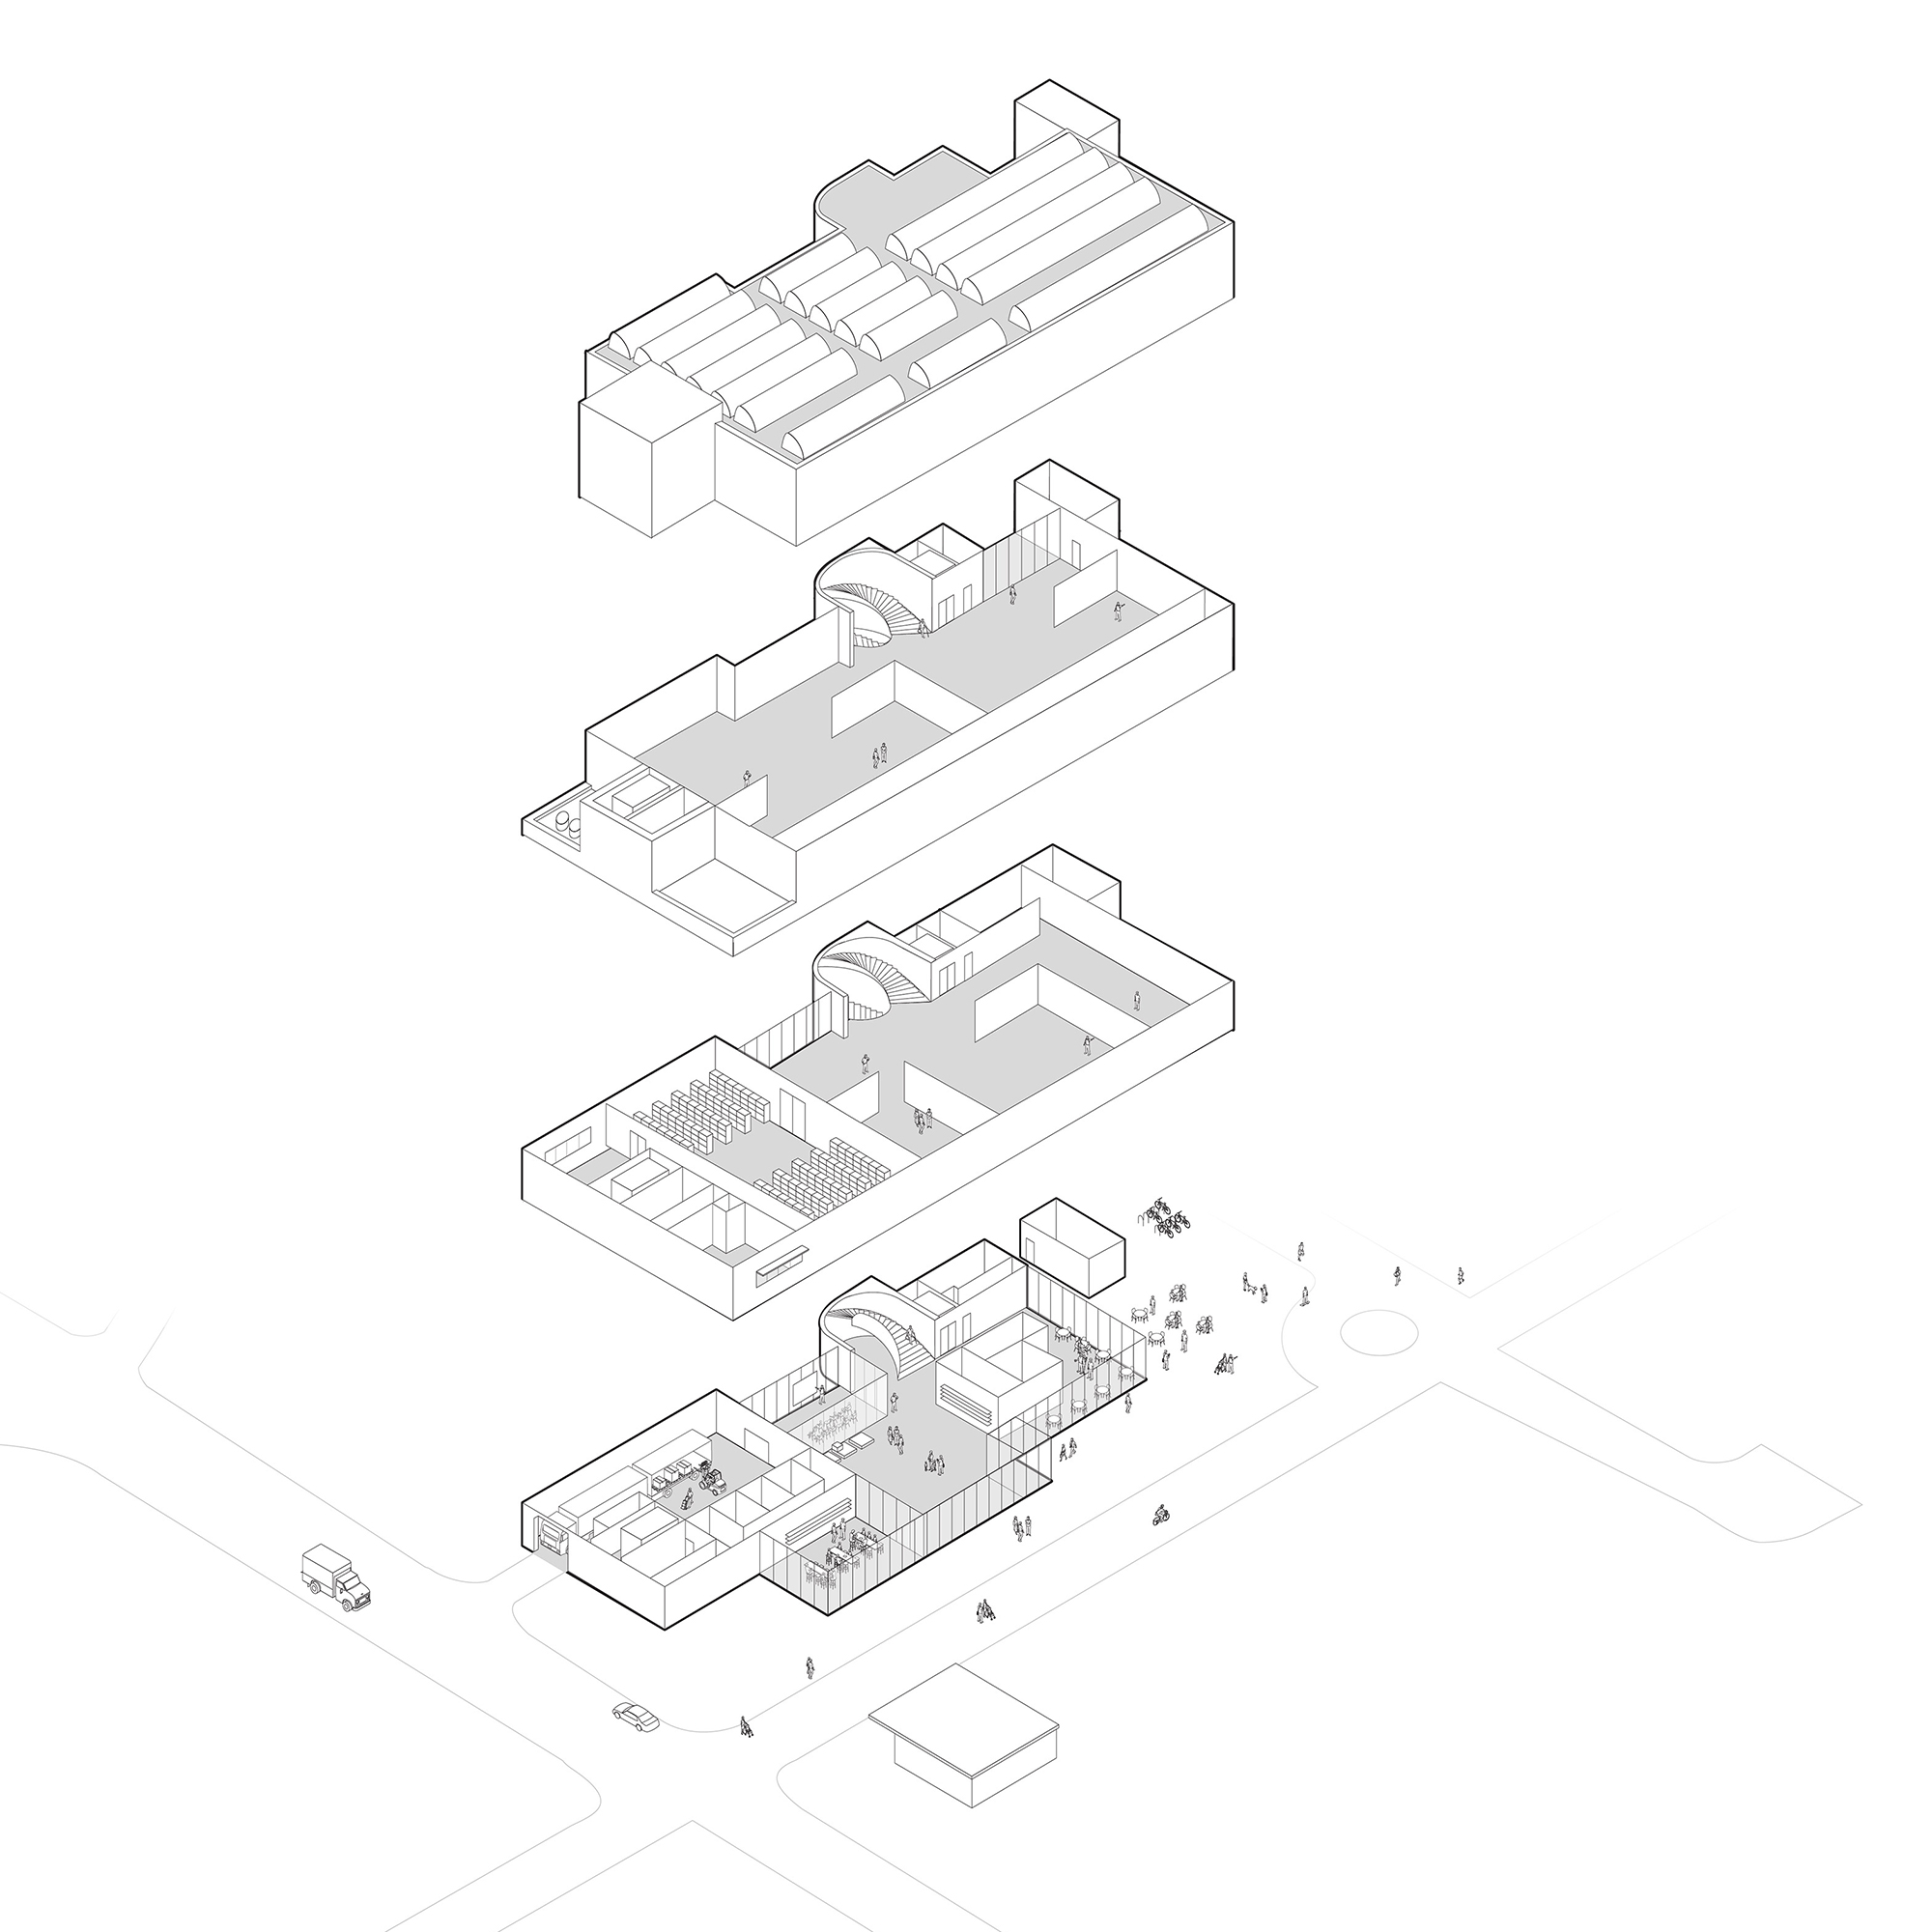 Sara Hilden Art Museum exploded isometric drawing by Kevin Schorn